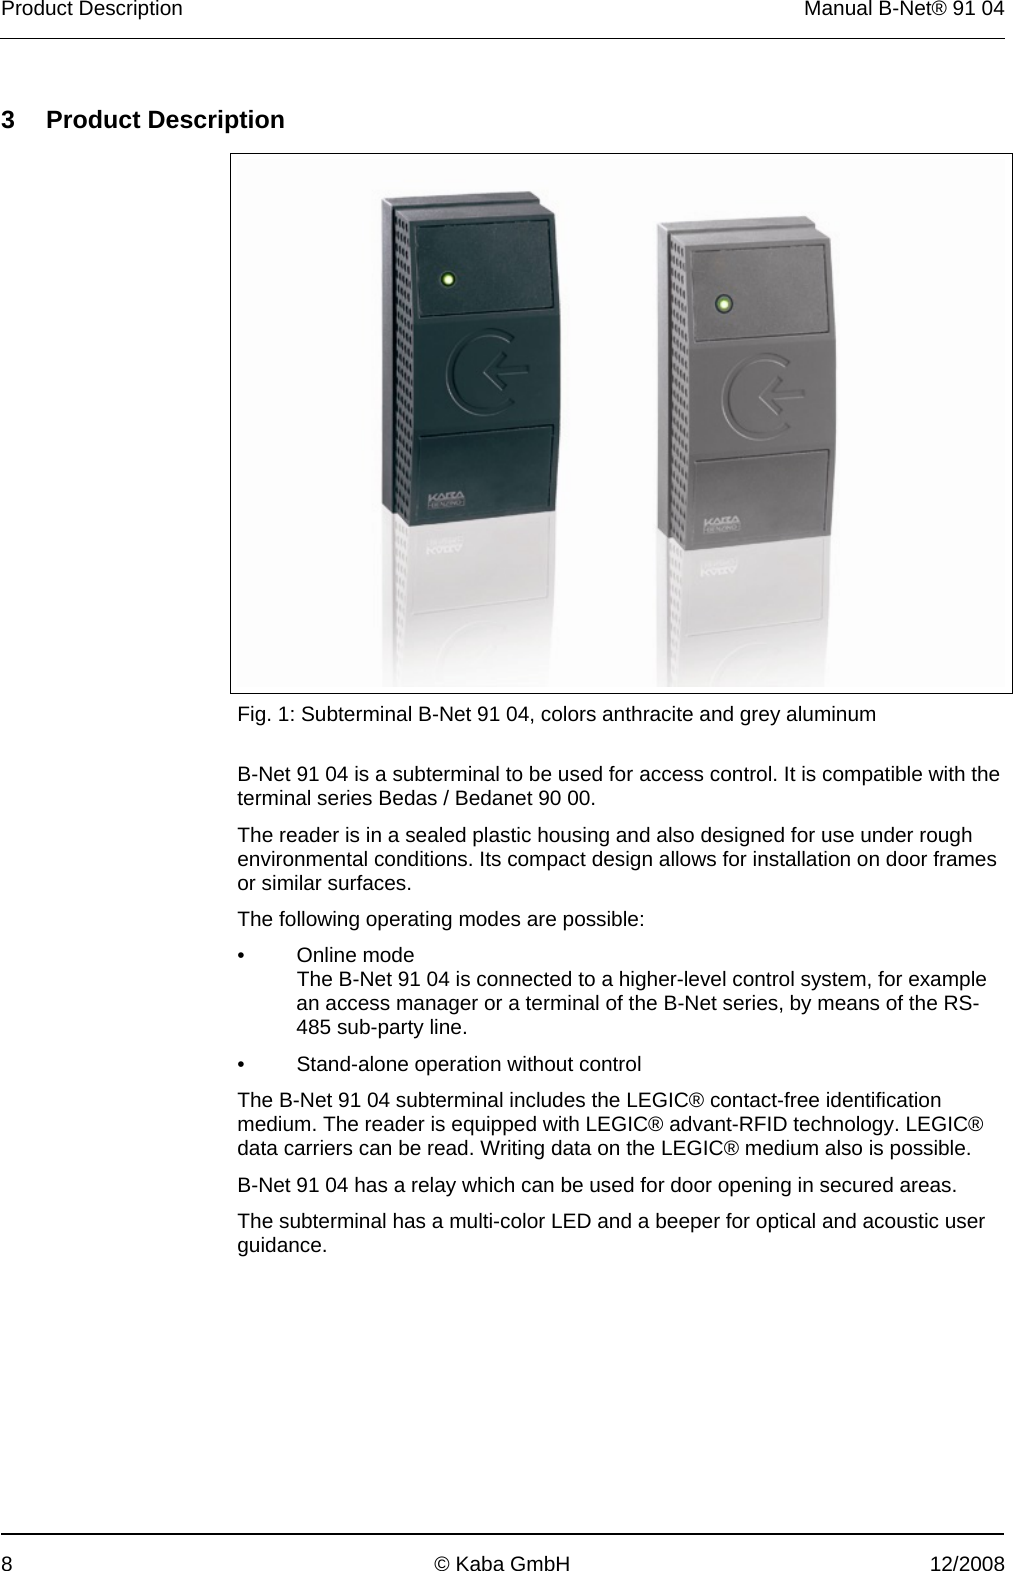 Product Description  Manual B-Net® 91 04 8  © Kaba GmbH  12/2008   3 Product Description      Fig. 1: Subterminal B-Net 91 04, colors anthracite and grey aluminum  B-Net 91 04 is a subterminal to be used for access control. It is compatible with the terminal series Bedas / Bedanet 90 00. The reader is in a sealed plastic housing and also designed for use under rough environmental conditions. Its compact design allows for installation on door frames or similar surfaces. The following operating modes are possible: • Online mode   The B-Net 91 04 is connected to a higher-level control system, for example an access manager or a terminal of the B-Net series, by means of the RS-485 sub-party line. •  Stand-alone operation without control The B-Net 91 04 subterminal includes the LEGIC® contact-free identification medium. The reader is equipped with LEGIC® advant-RFID technology. LEGIC® data carriers can be read. Writing data on the LEGIC® medium also is possible. B-Net 91 04 has a relay which can be used for door opening in secured areas. The subterminal has a multi-color LED and a beeper for optical and acoustic user guidance. 